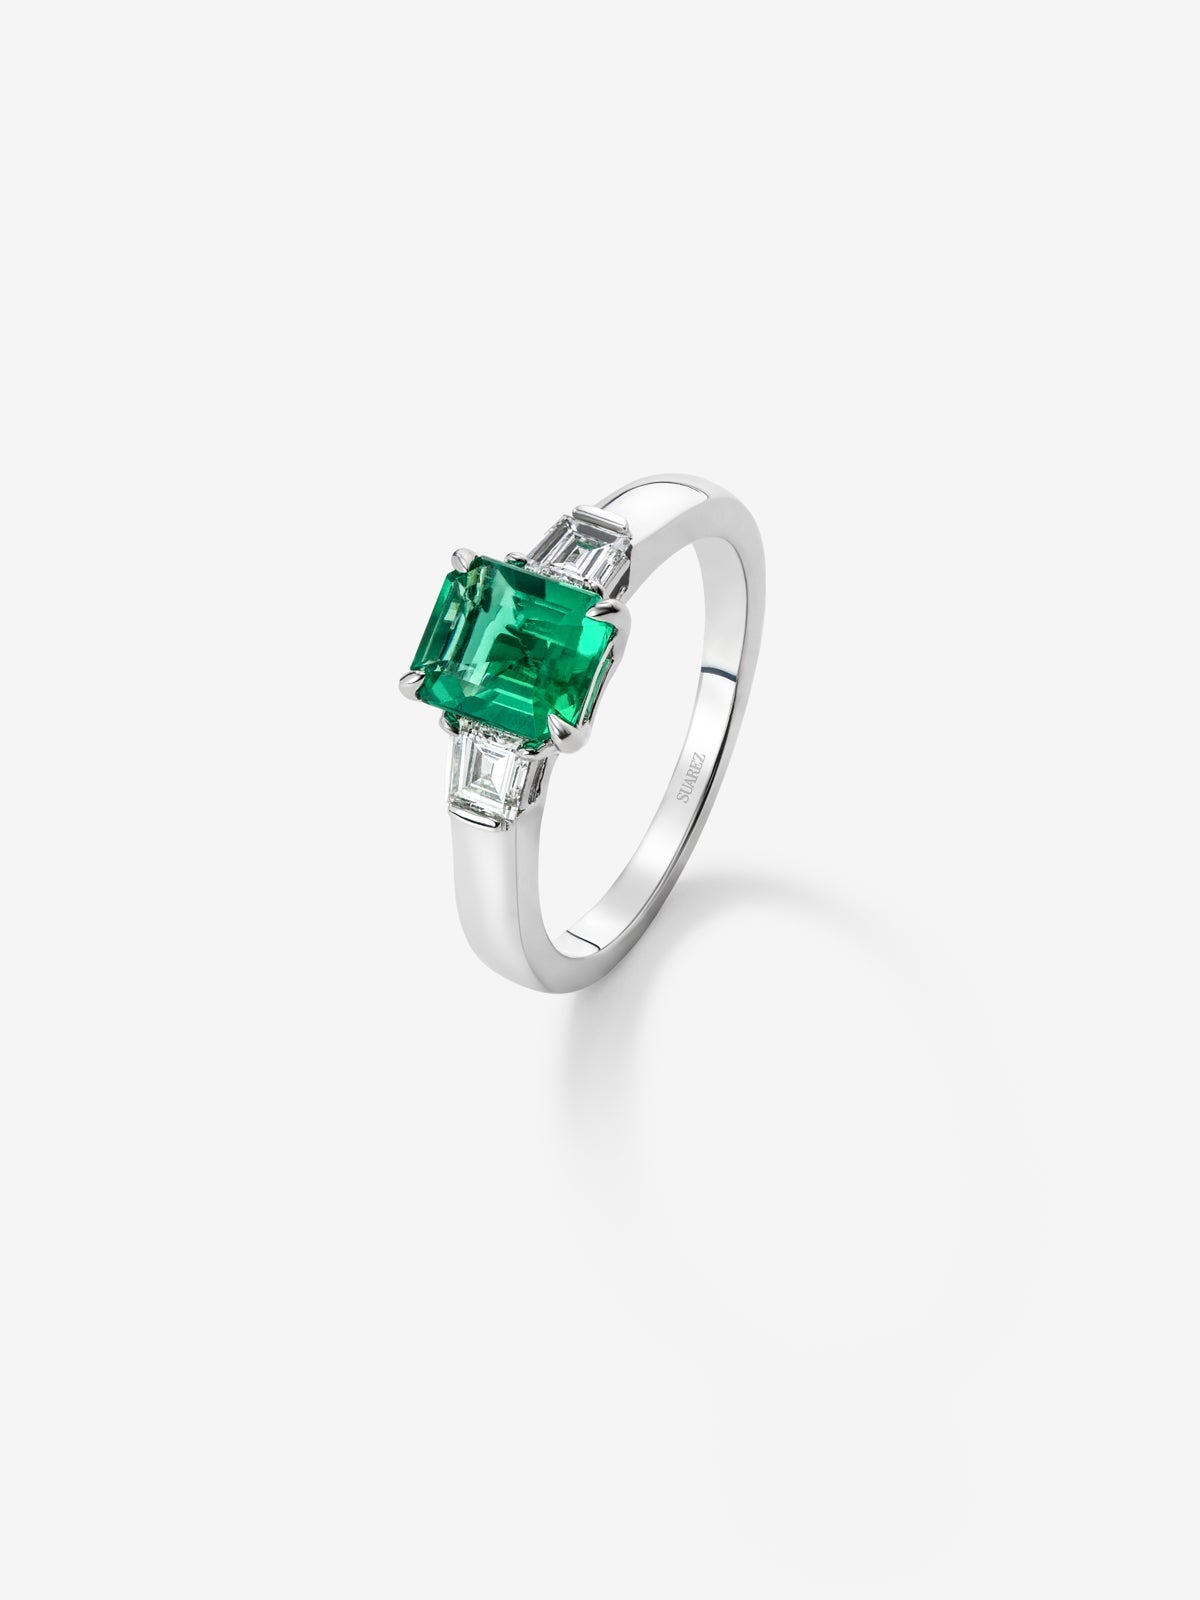 18K white gold triple ring with vivid green emerald in emerald cut of 1.64 cts and 2 white diamonds in fancy cut with a total of 0.4 cts